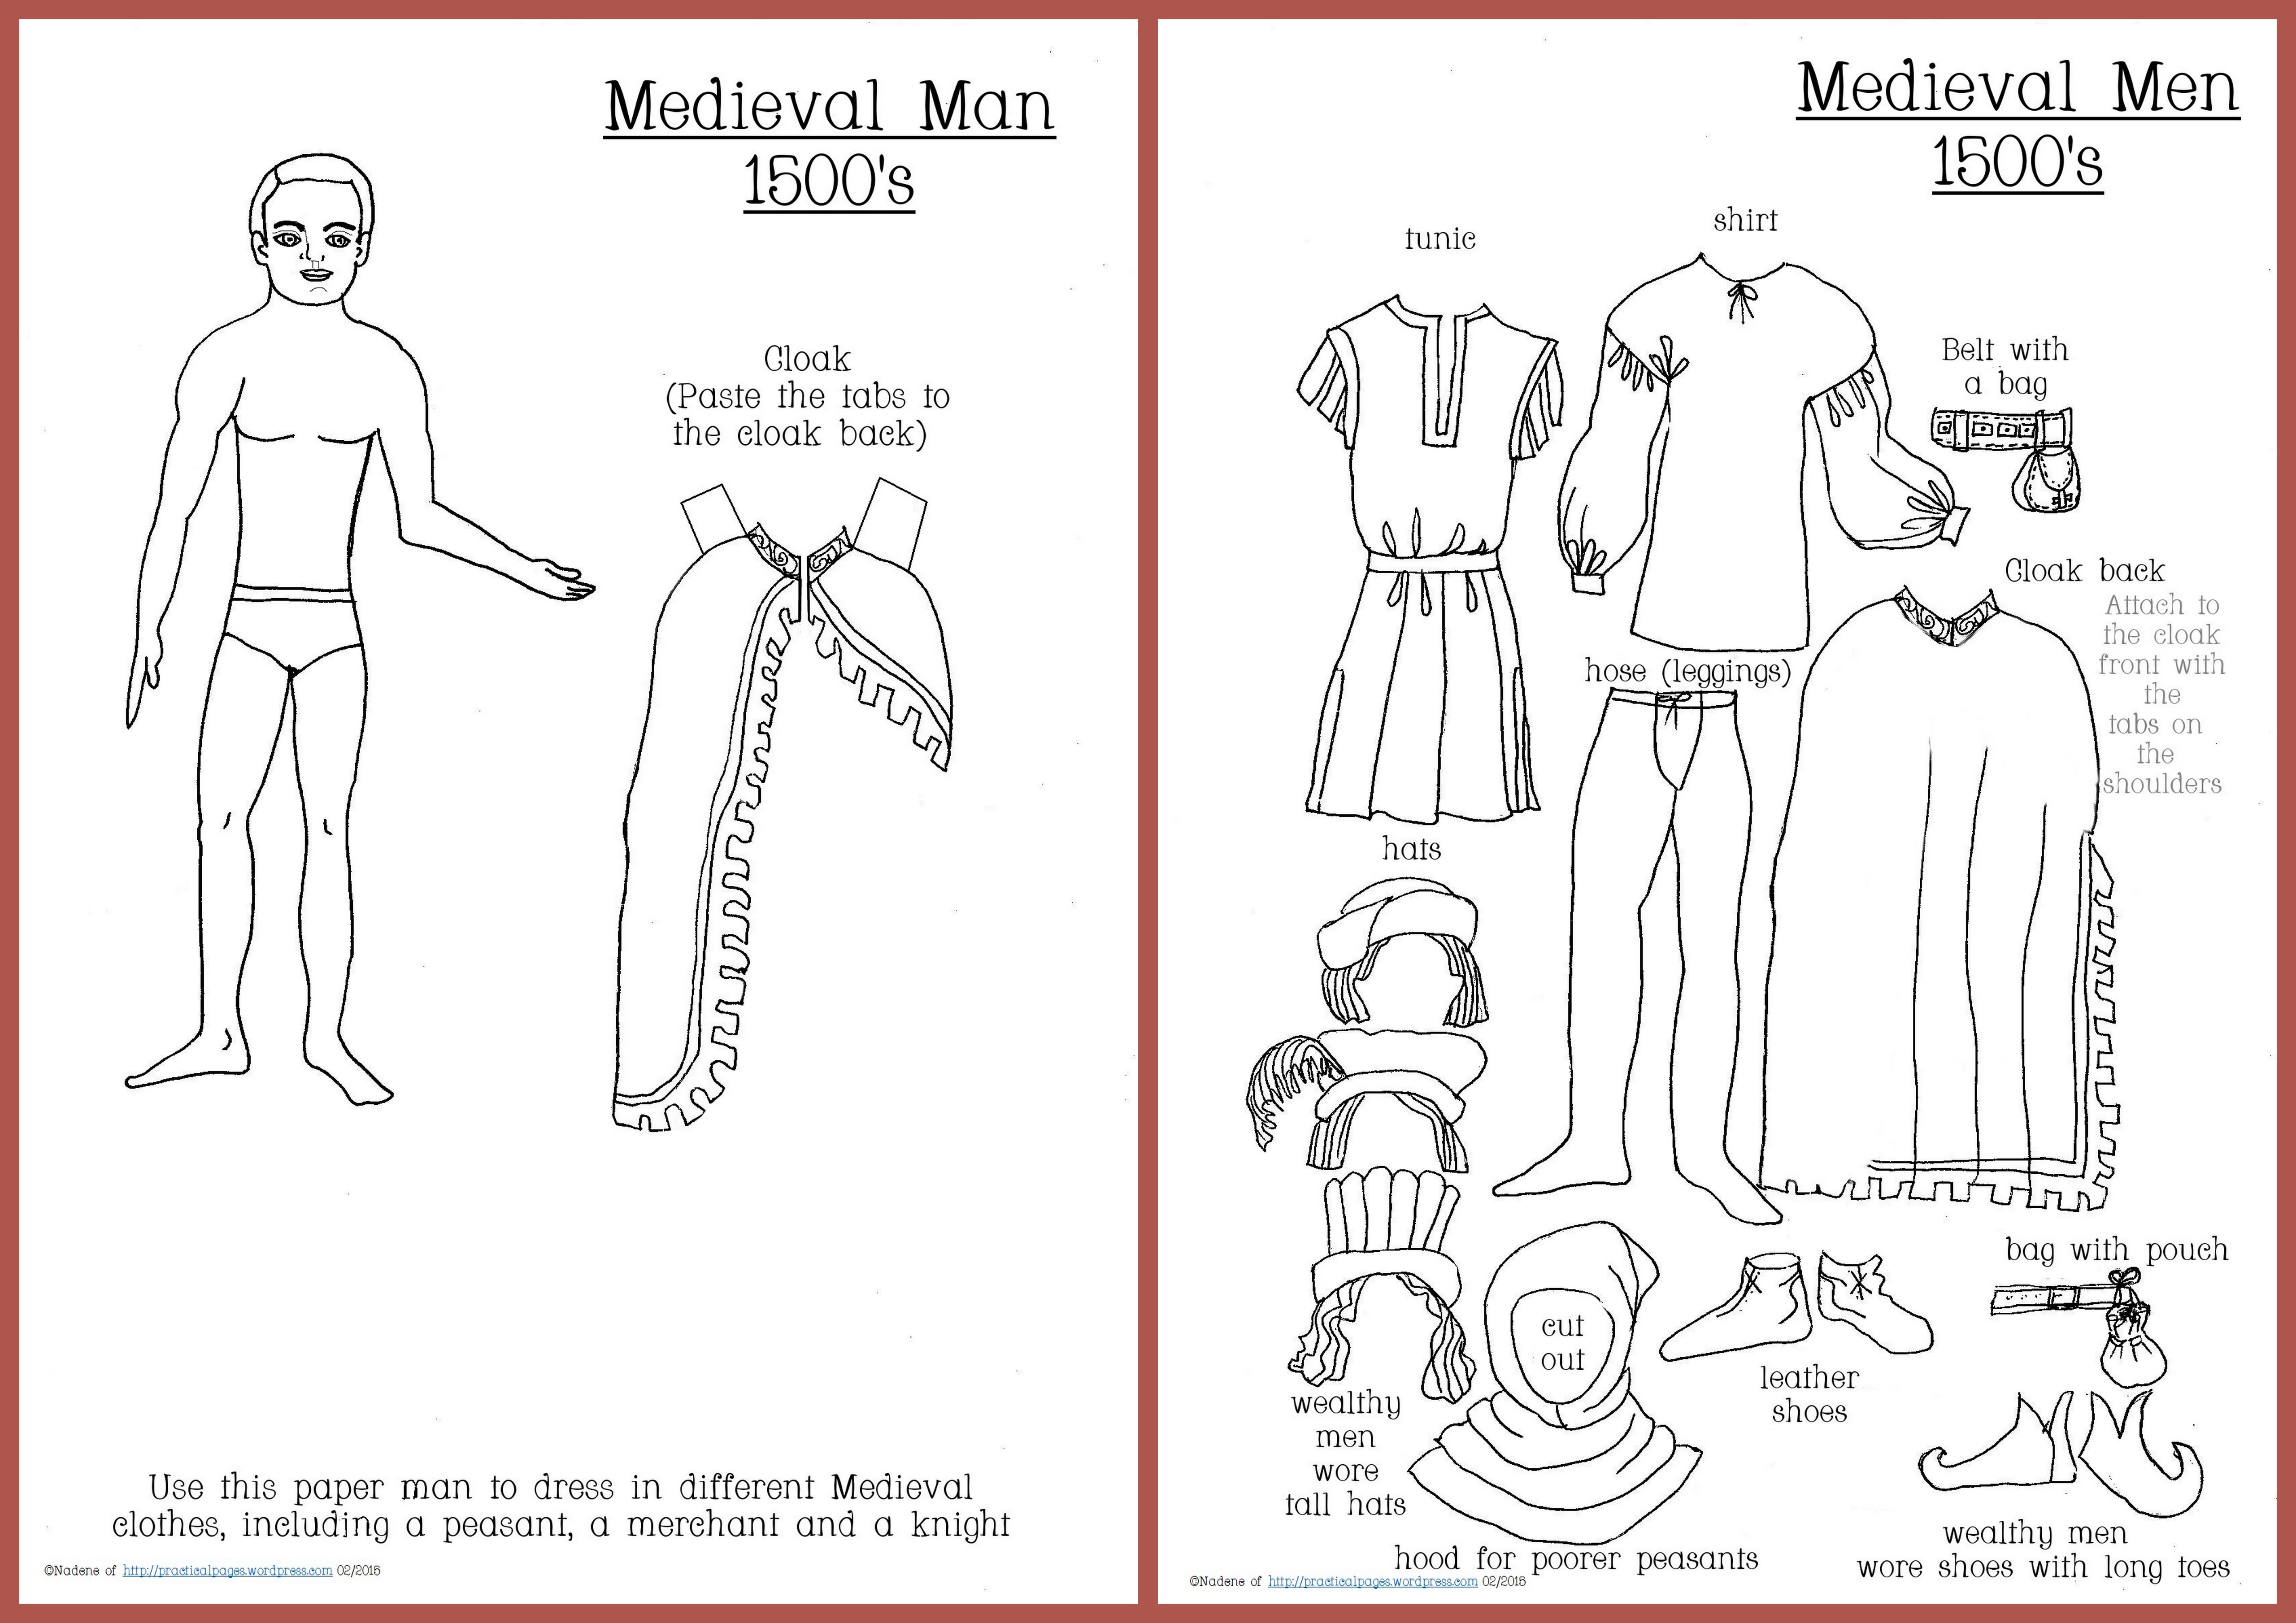 Paper Dolls | Practical Pages - Medieval Paper Dolls Free Printable